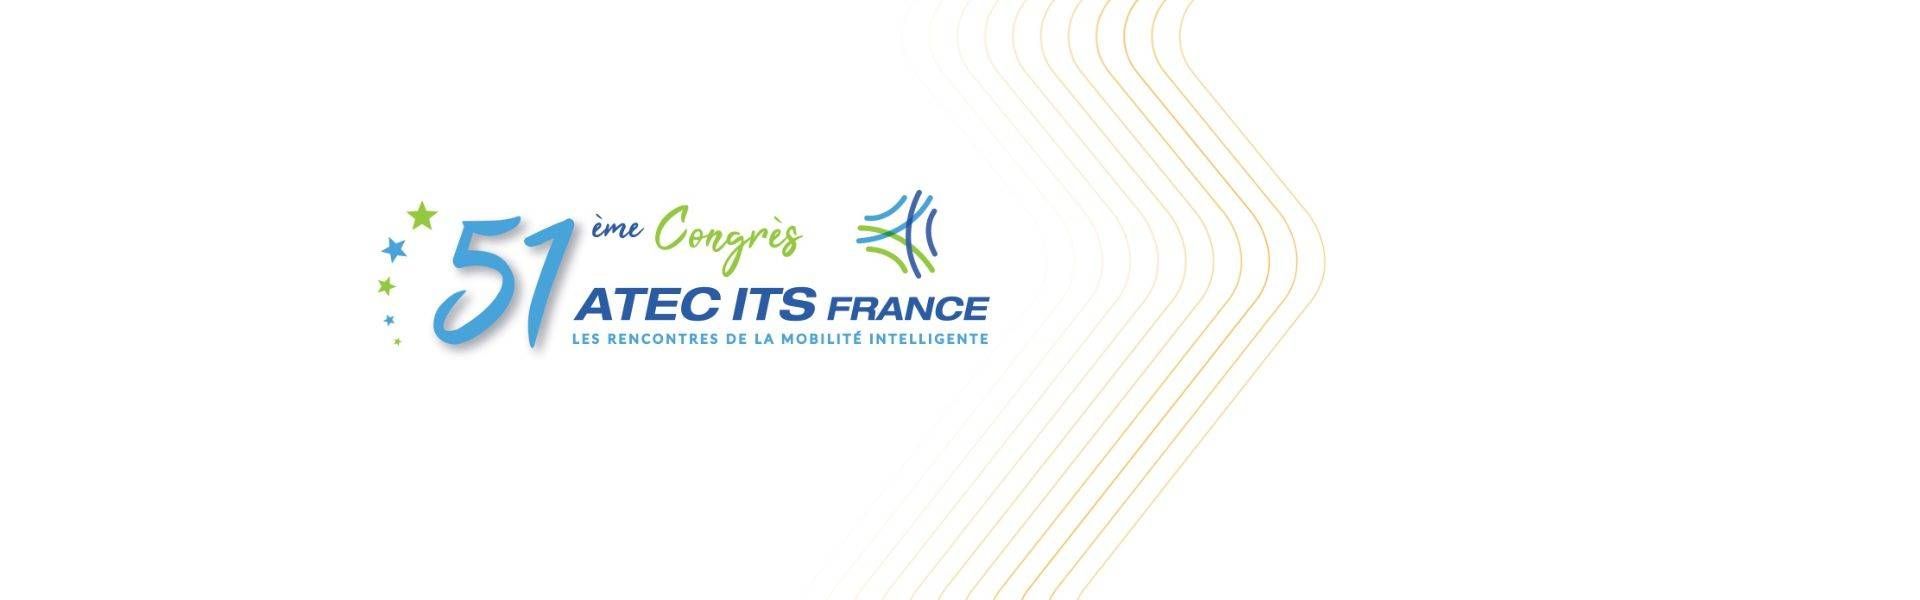 Meet SWARCO at ATEC ITS France event in Paris